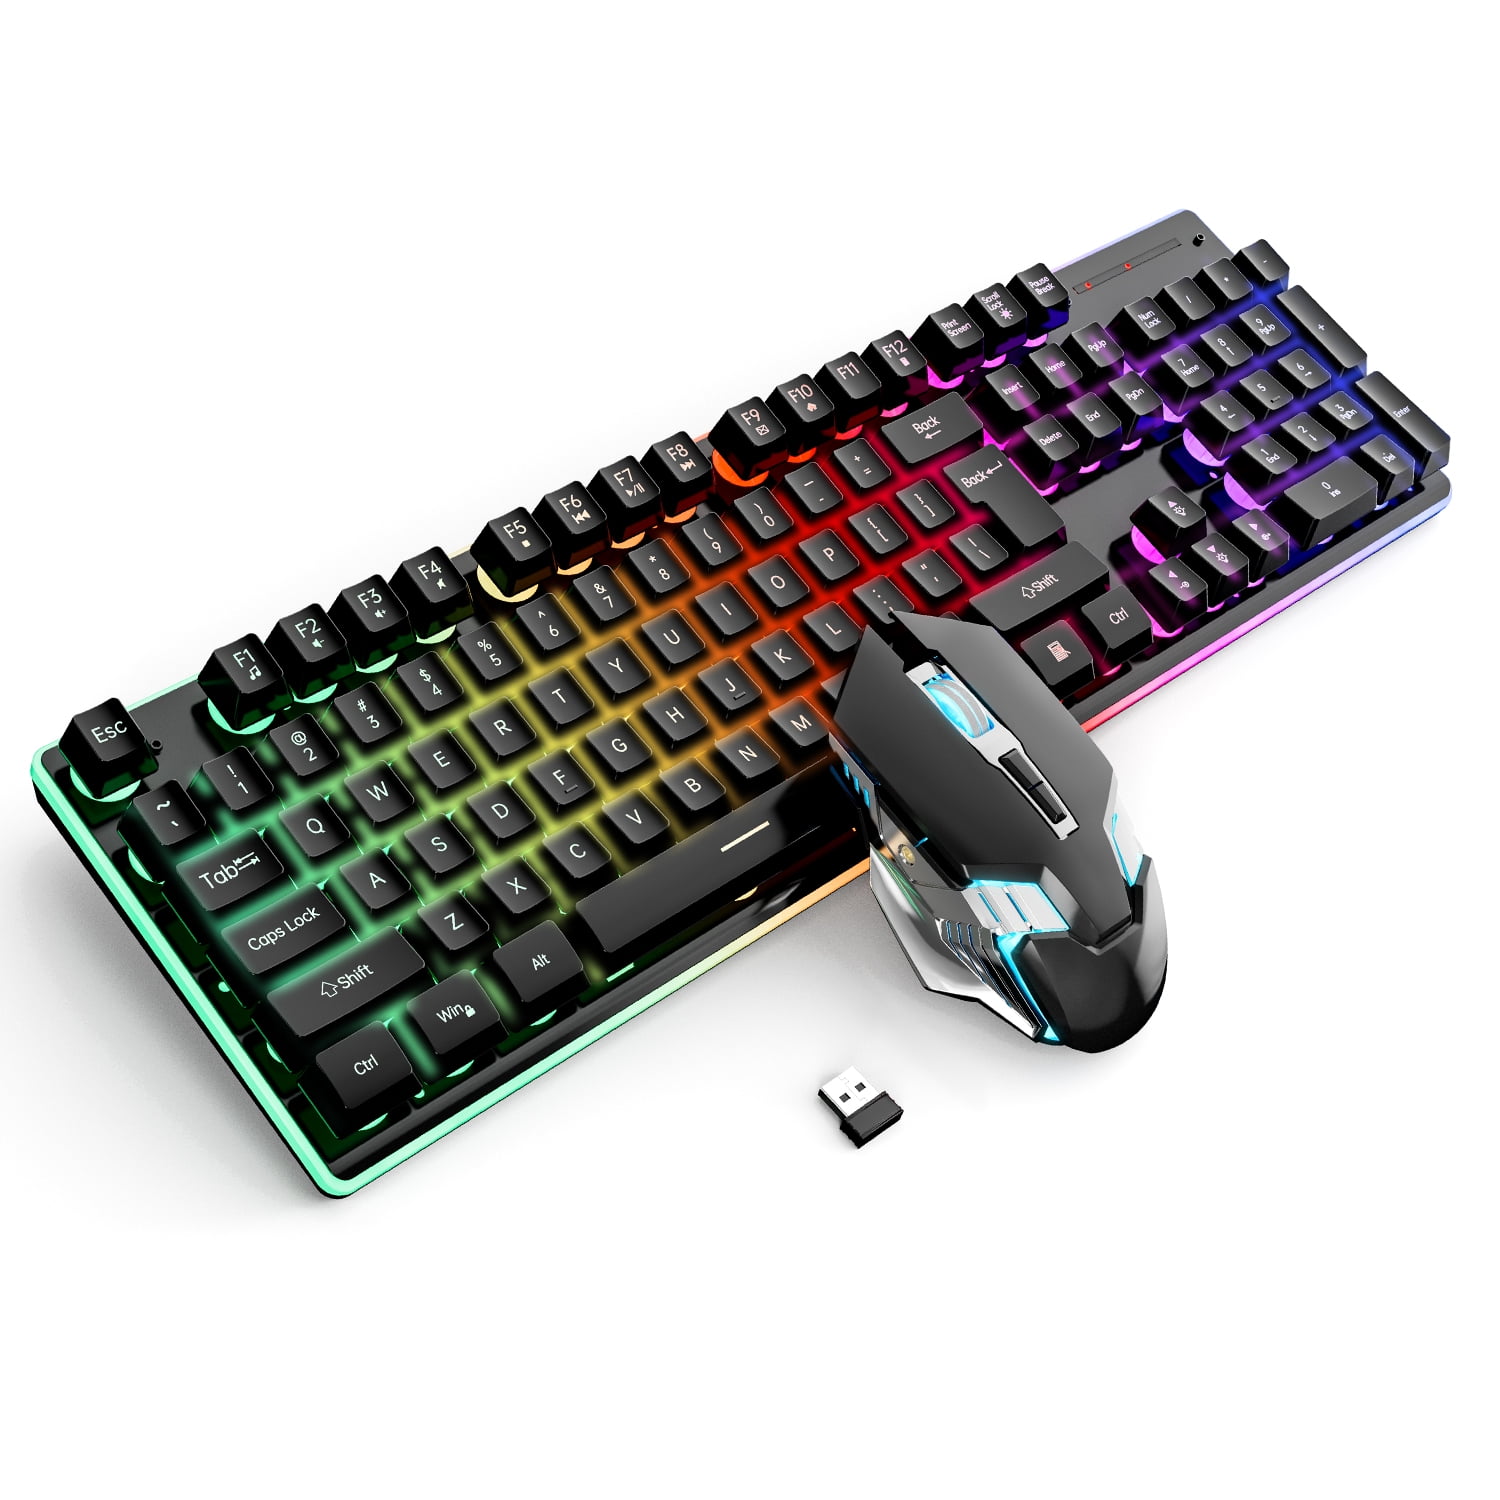 Wireless Keyboard and Mouse Combo, 104 Keys Rechargeable Gaming Keyboard Mouse Set, Ergonomic Anti-Ghosting Keyboard, W/ 2.4G Receiver, 7 Color Backlit for Windows Mac Desktop Laptop - Walmart.com